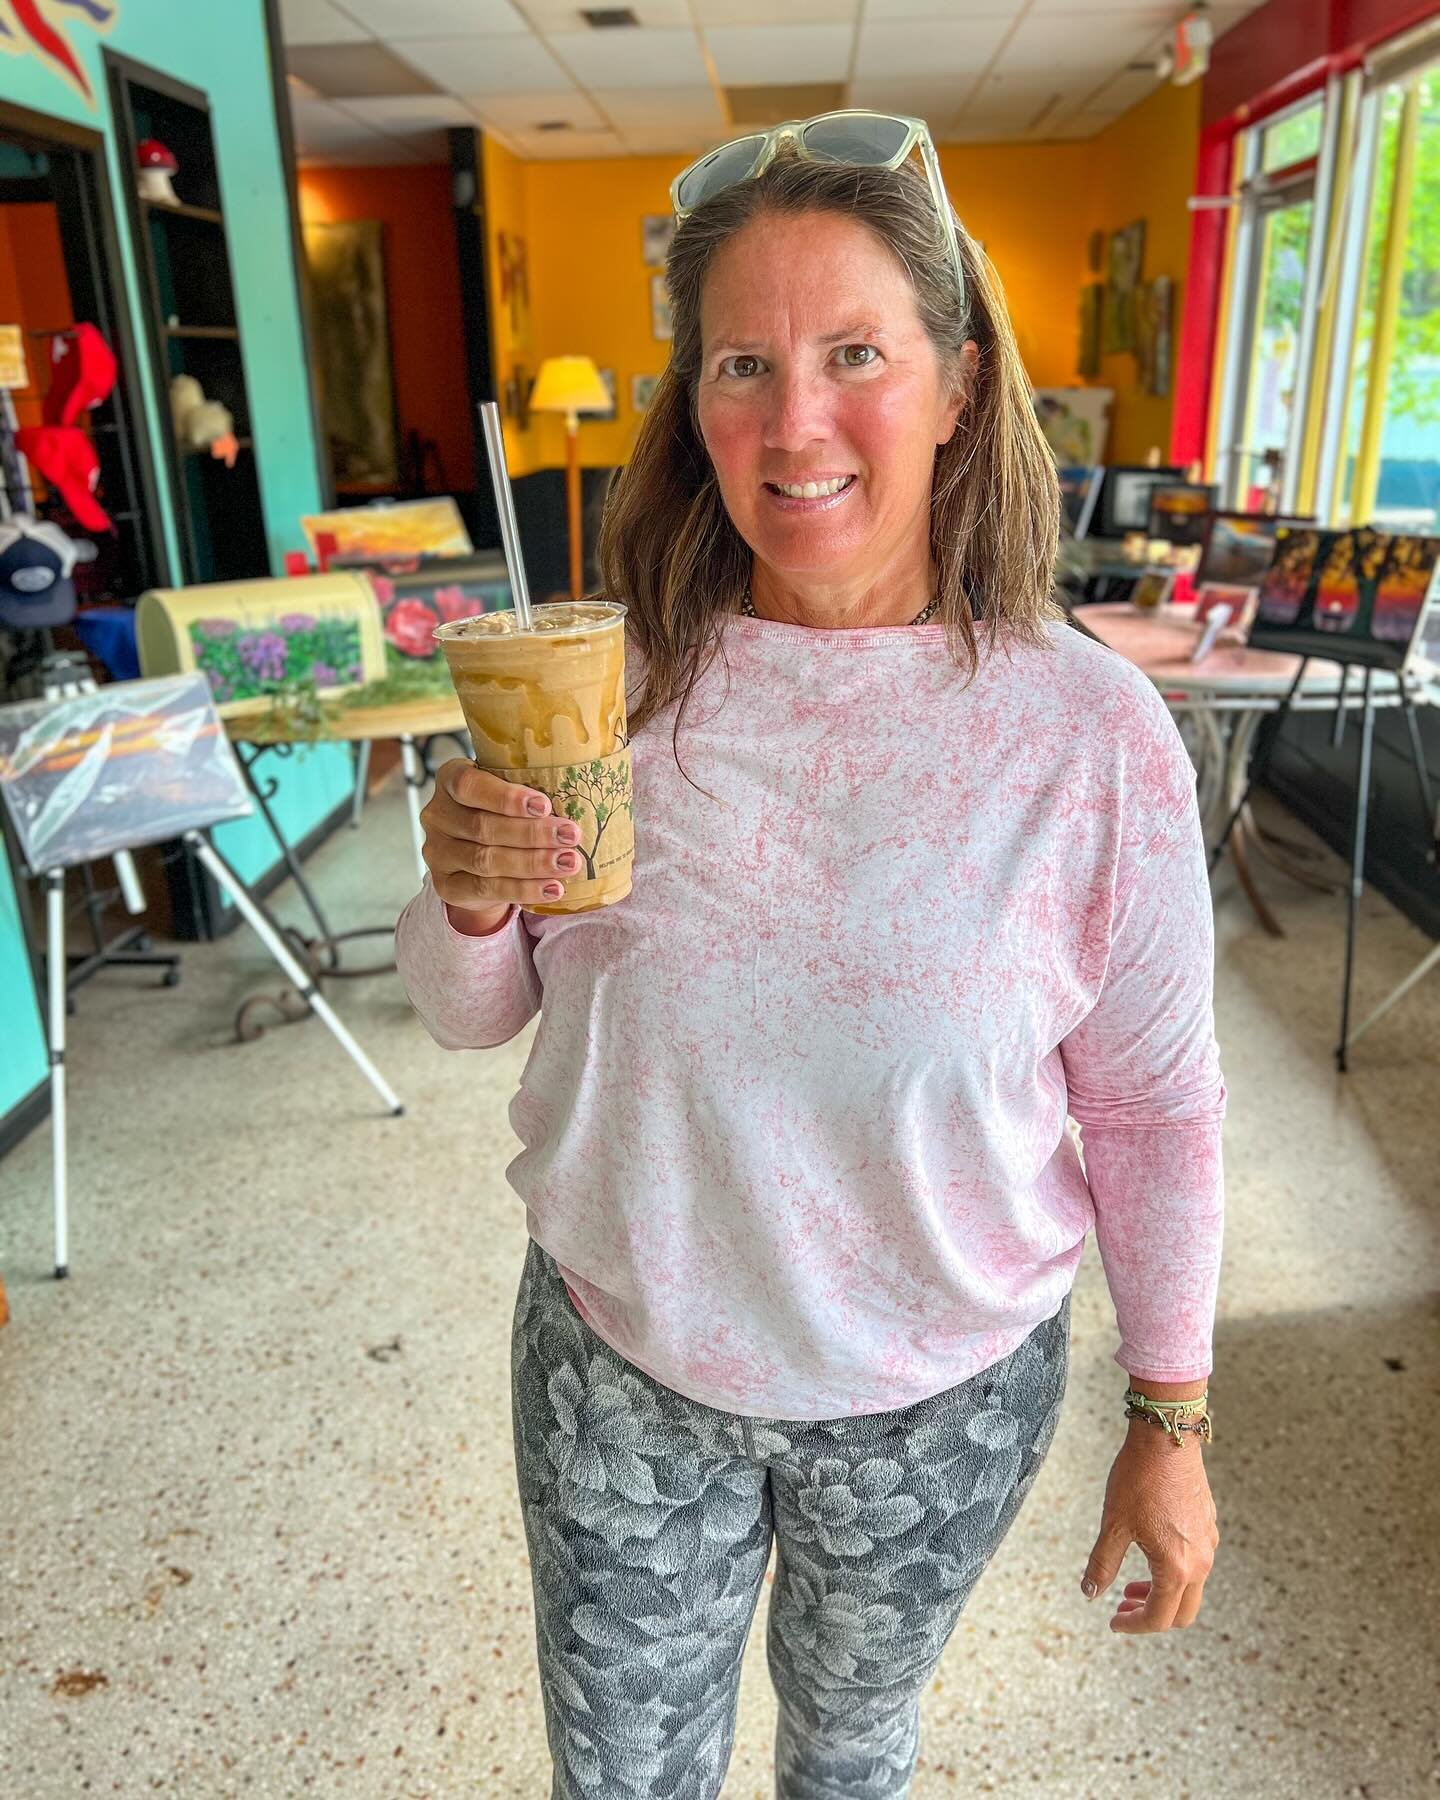 Meet Sandy! She is a Fairhope local that loves wind surfing and catching a tan in her free time. Sandy has been coming in to The Coffee Loft for many years. Her favorite beverage is the Frozen Pooh Bear with honey drizzle on top! We asked Sandy what 